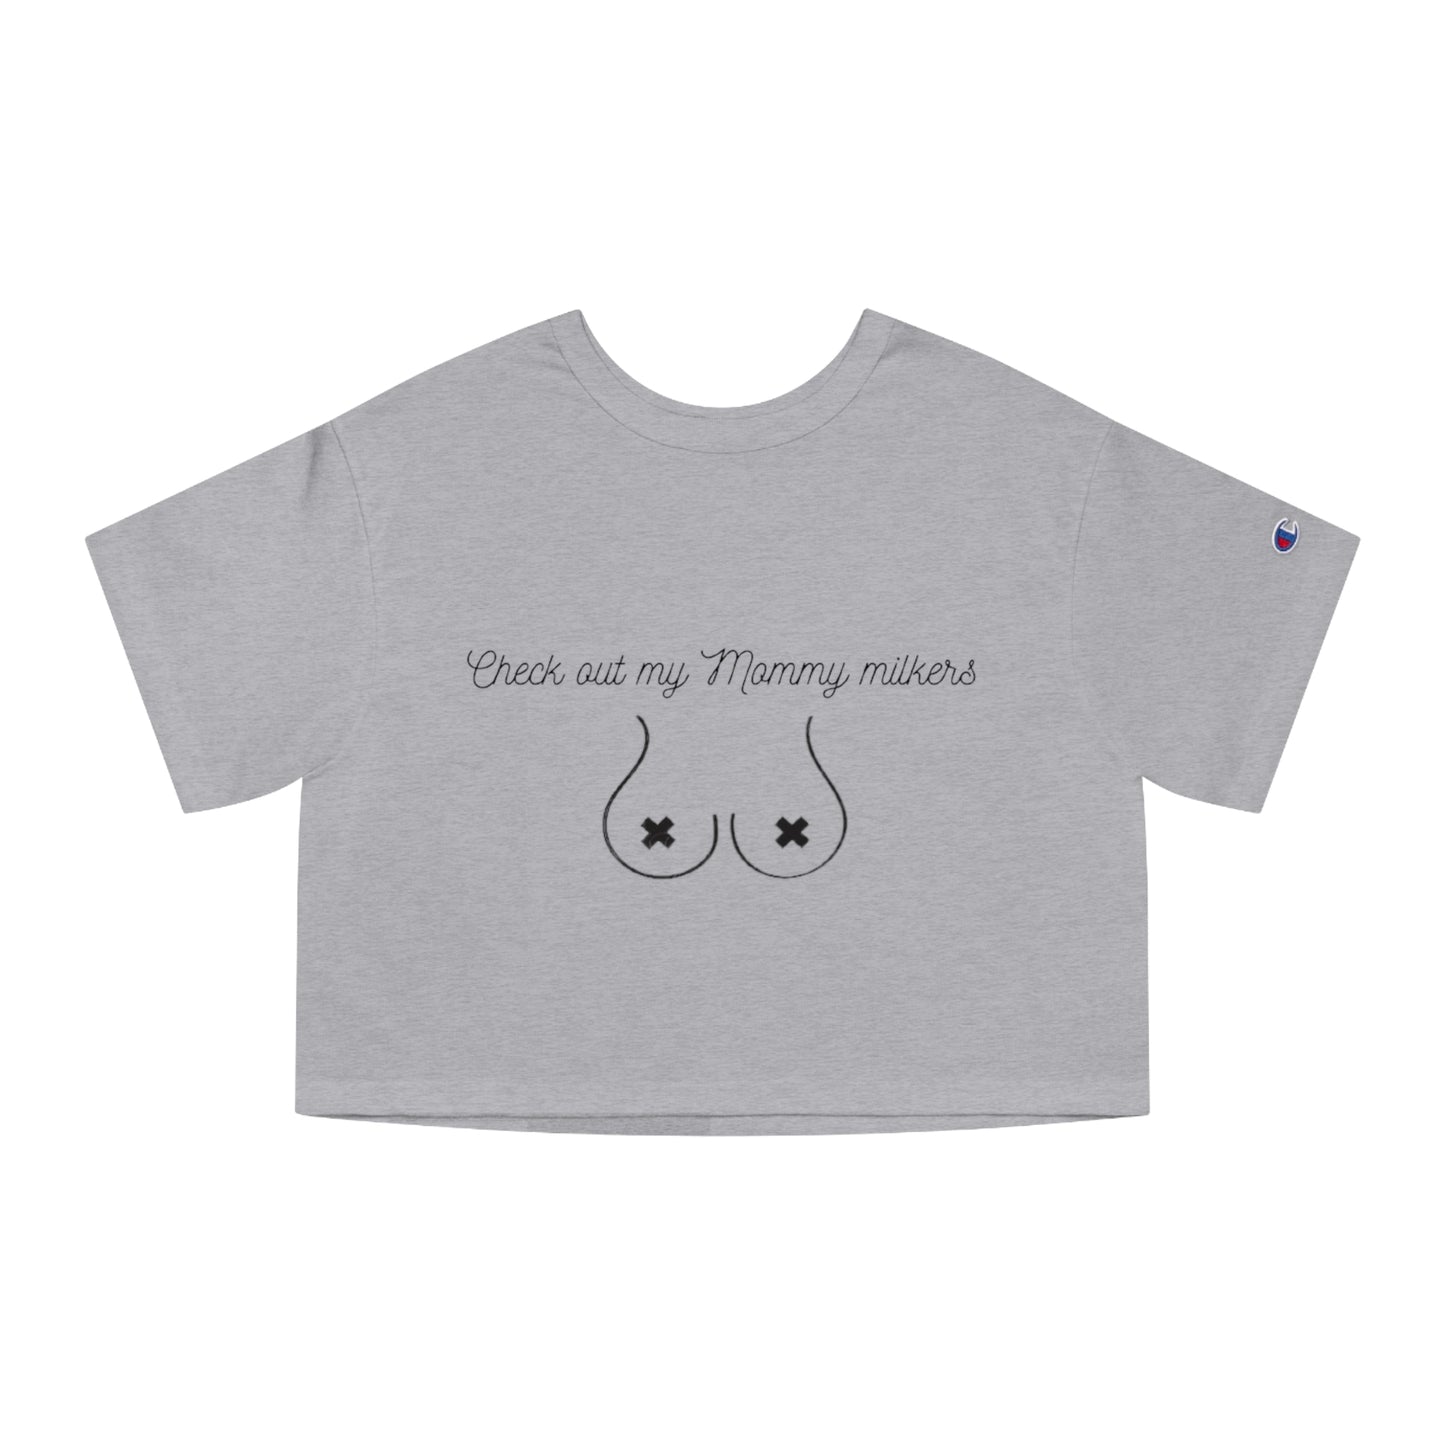 Mommy Milkers Cropped T-Shirt